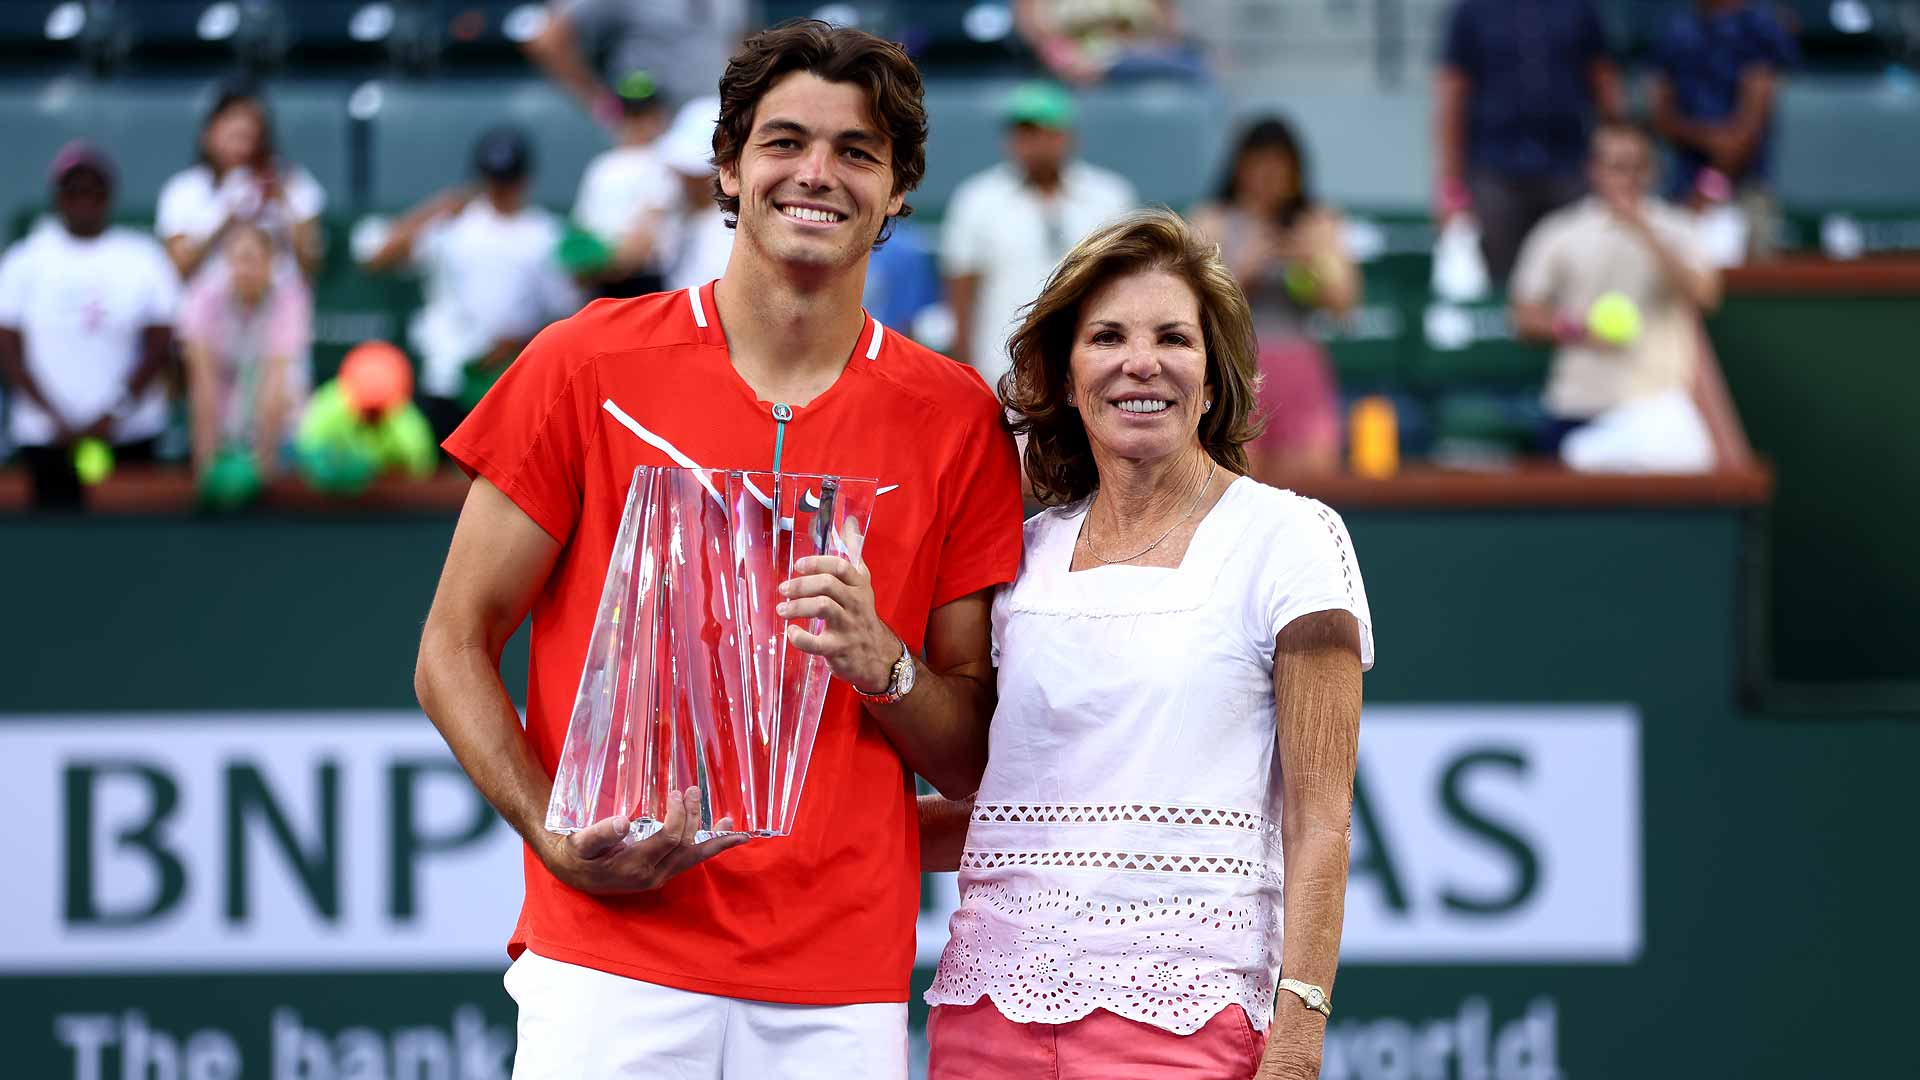 Taylor Fritz Getting To Know The Netflix Break Point Star ATP Tour